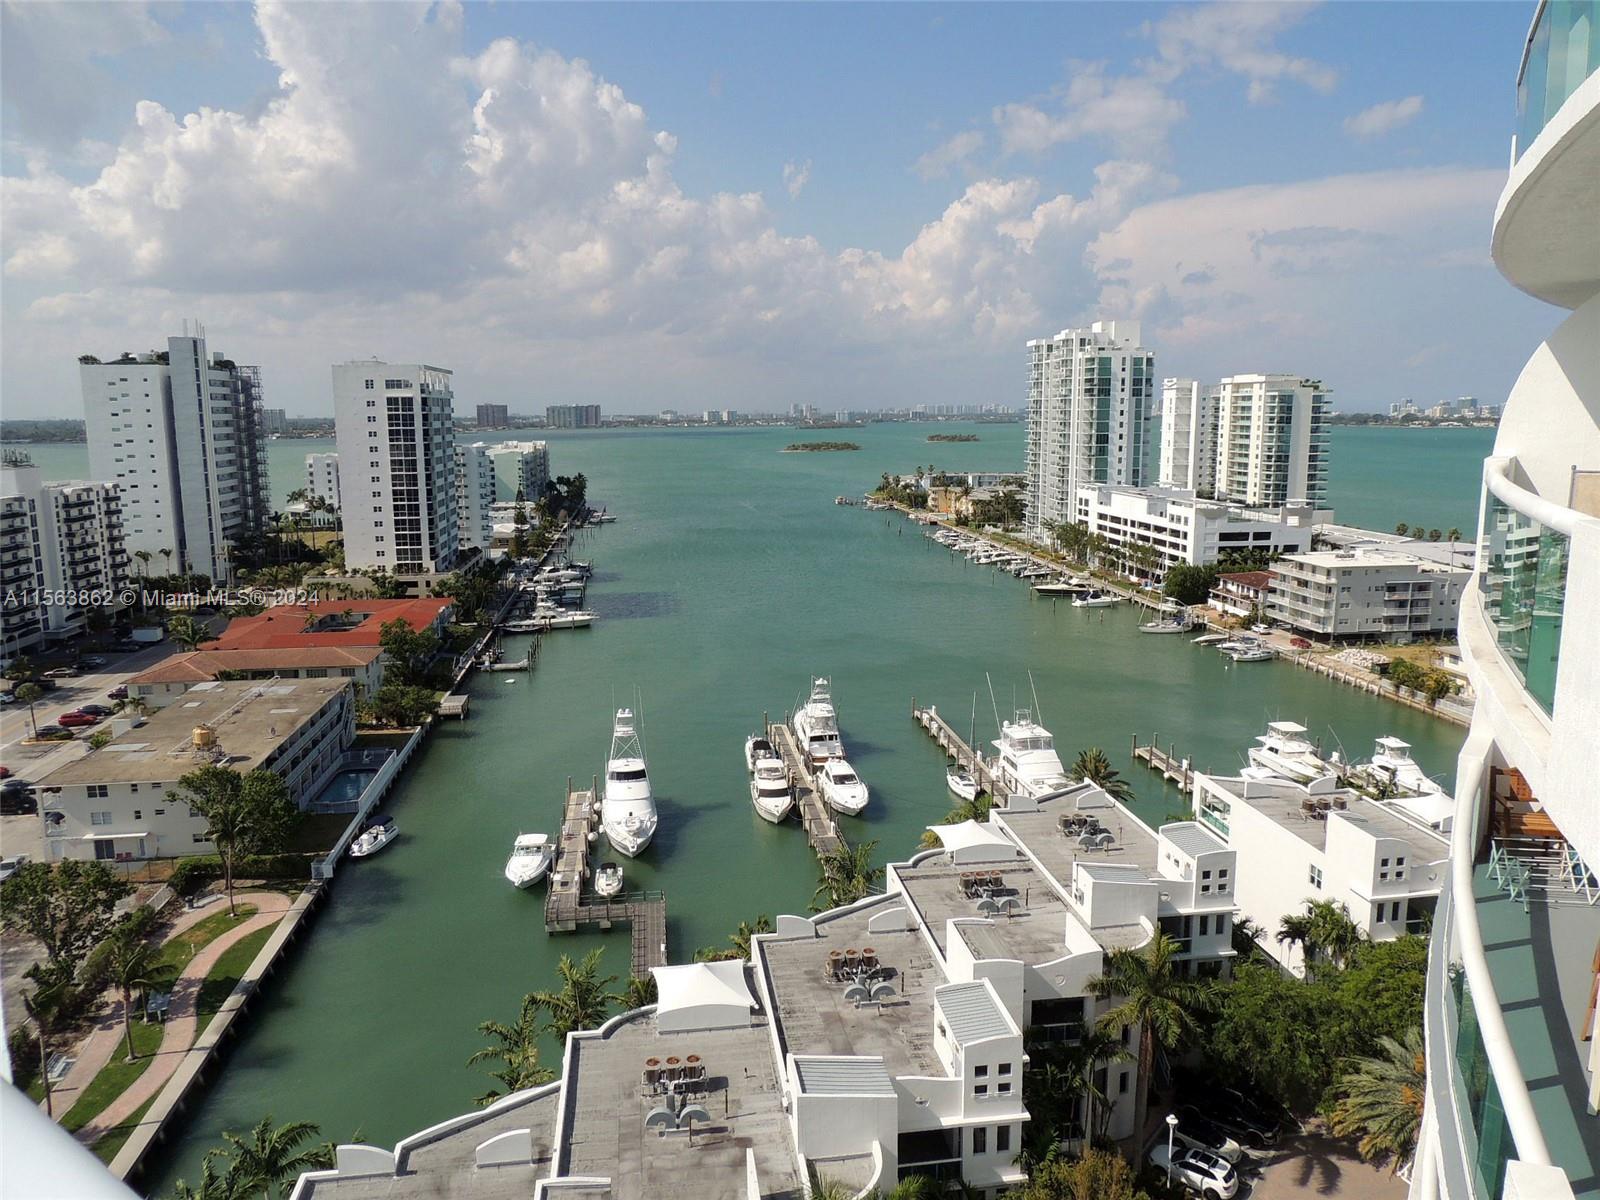 JUST REDUCED, BEST PRICE IN THE BUILDING!! MIAMI LIVING AT IT'S FINEST!! INCREDIBLY SPACIOUS 2 BED /2 BATH UNIT TUCKED AWAY IN BEAUTIFUL NORTH BAY VILLAGE & ONLY MINUTES TO THE BEACH & ALL MAJOR HIGHWAYS!! THIS SPECTACULAR LOWER PENTHOUSE UNIT BOASTS 1,223 SQFT WITH ALL TILE FLOORS, SPLIT FLOORPLAN WITH AMAZING NATURAL LIGHT & LARGE WALK-IN CLOSETS!! UNIT IS VERY CLEAN & FRESHLY PAINTED; KITCHEN HAS GRANITE COUNTERS, STAINLESS STEEL APPLIANCES & PLENTY OF CABINET SPACE + WASHER/DRYER IN THE UNIT! HUGE, NORTH/WEST FACING BALCONY WITH SWEEPING WIDE BAY VIEWS MAKES FOR AMAZING OUTDOOR LIVING!! PET FRIENDLY BUILDING UP TO 25LBS + BASIC CABLE INCLUDED + 1 ASSIGNED/COVERED PARKING SPACE!! WILL NOT LAST, EASY TO SHOW!!